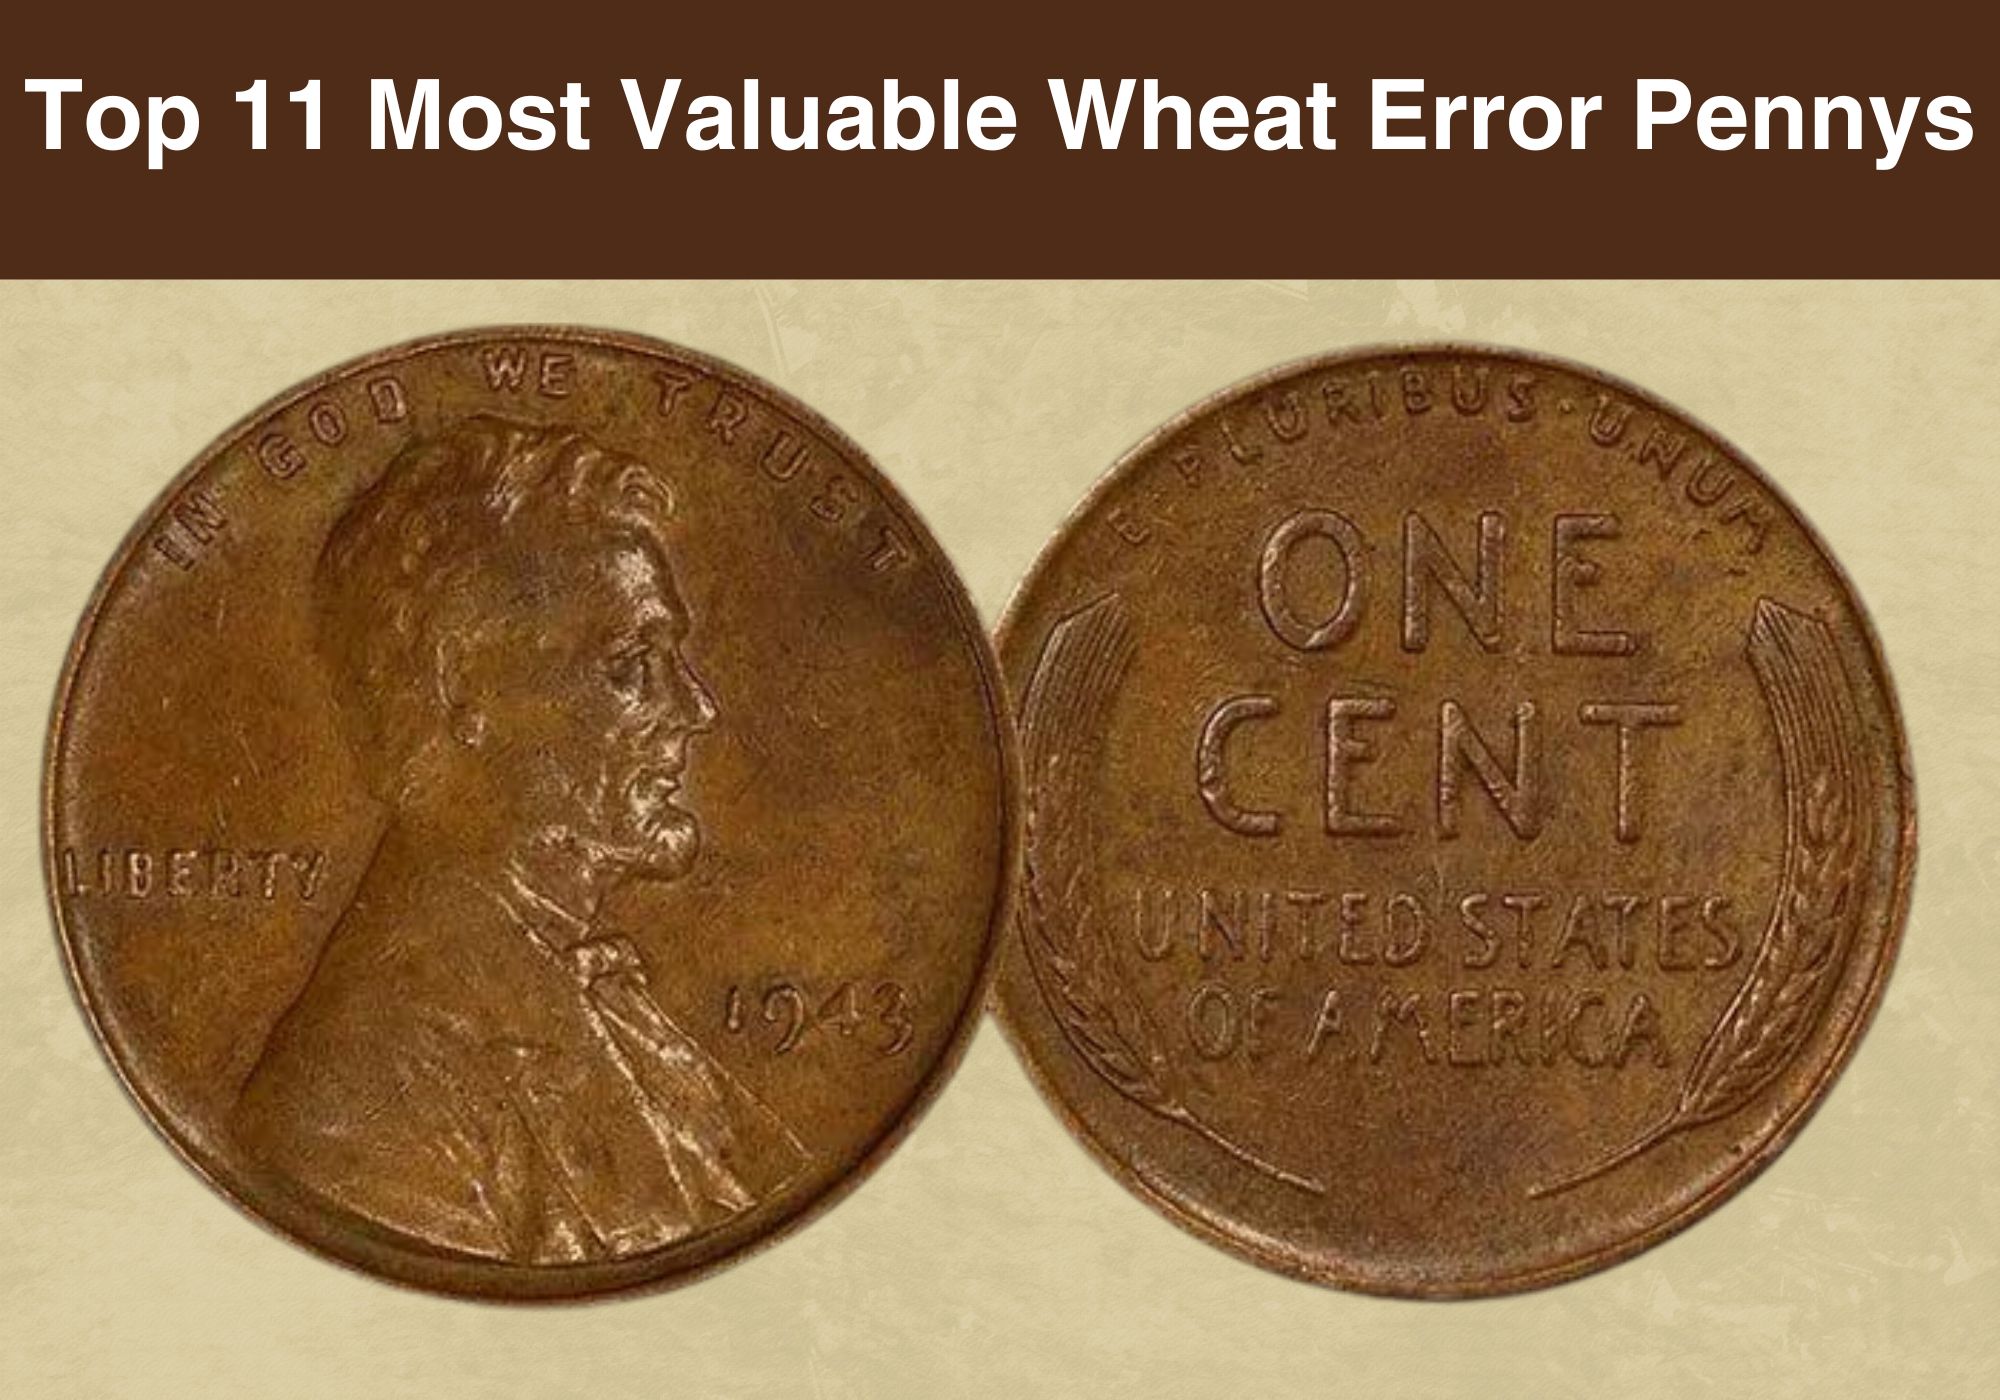 Top 11 Most Valuable Wheat Error Pennys